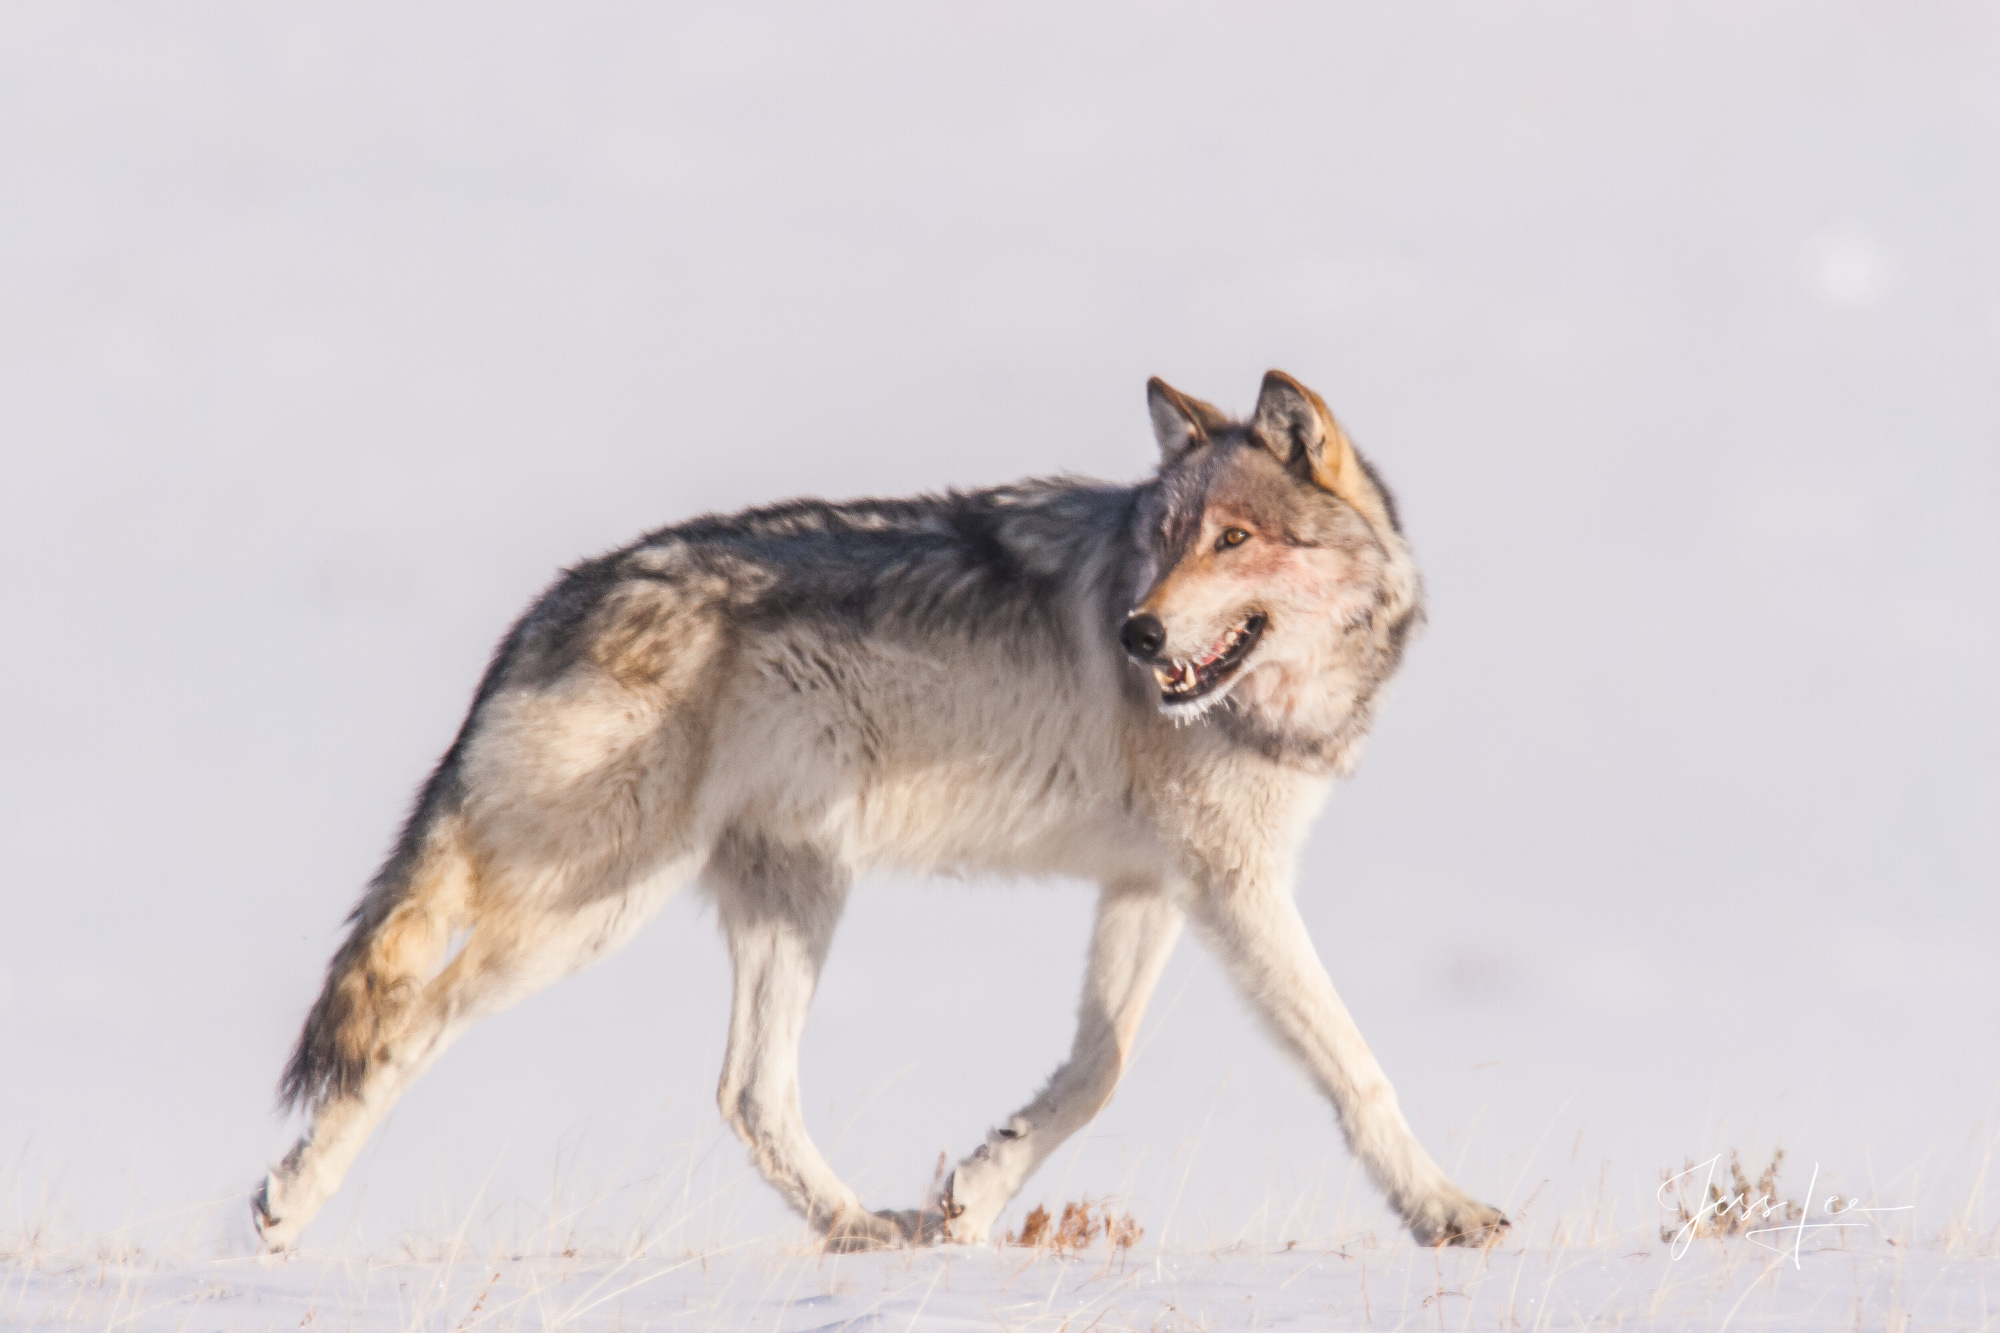 Yellowstone wolf in winter Nat Geo. Limited Edition Fine Art Print.